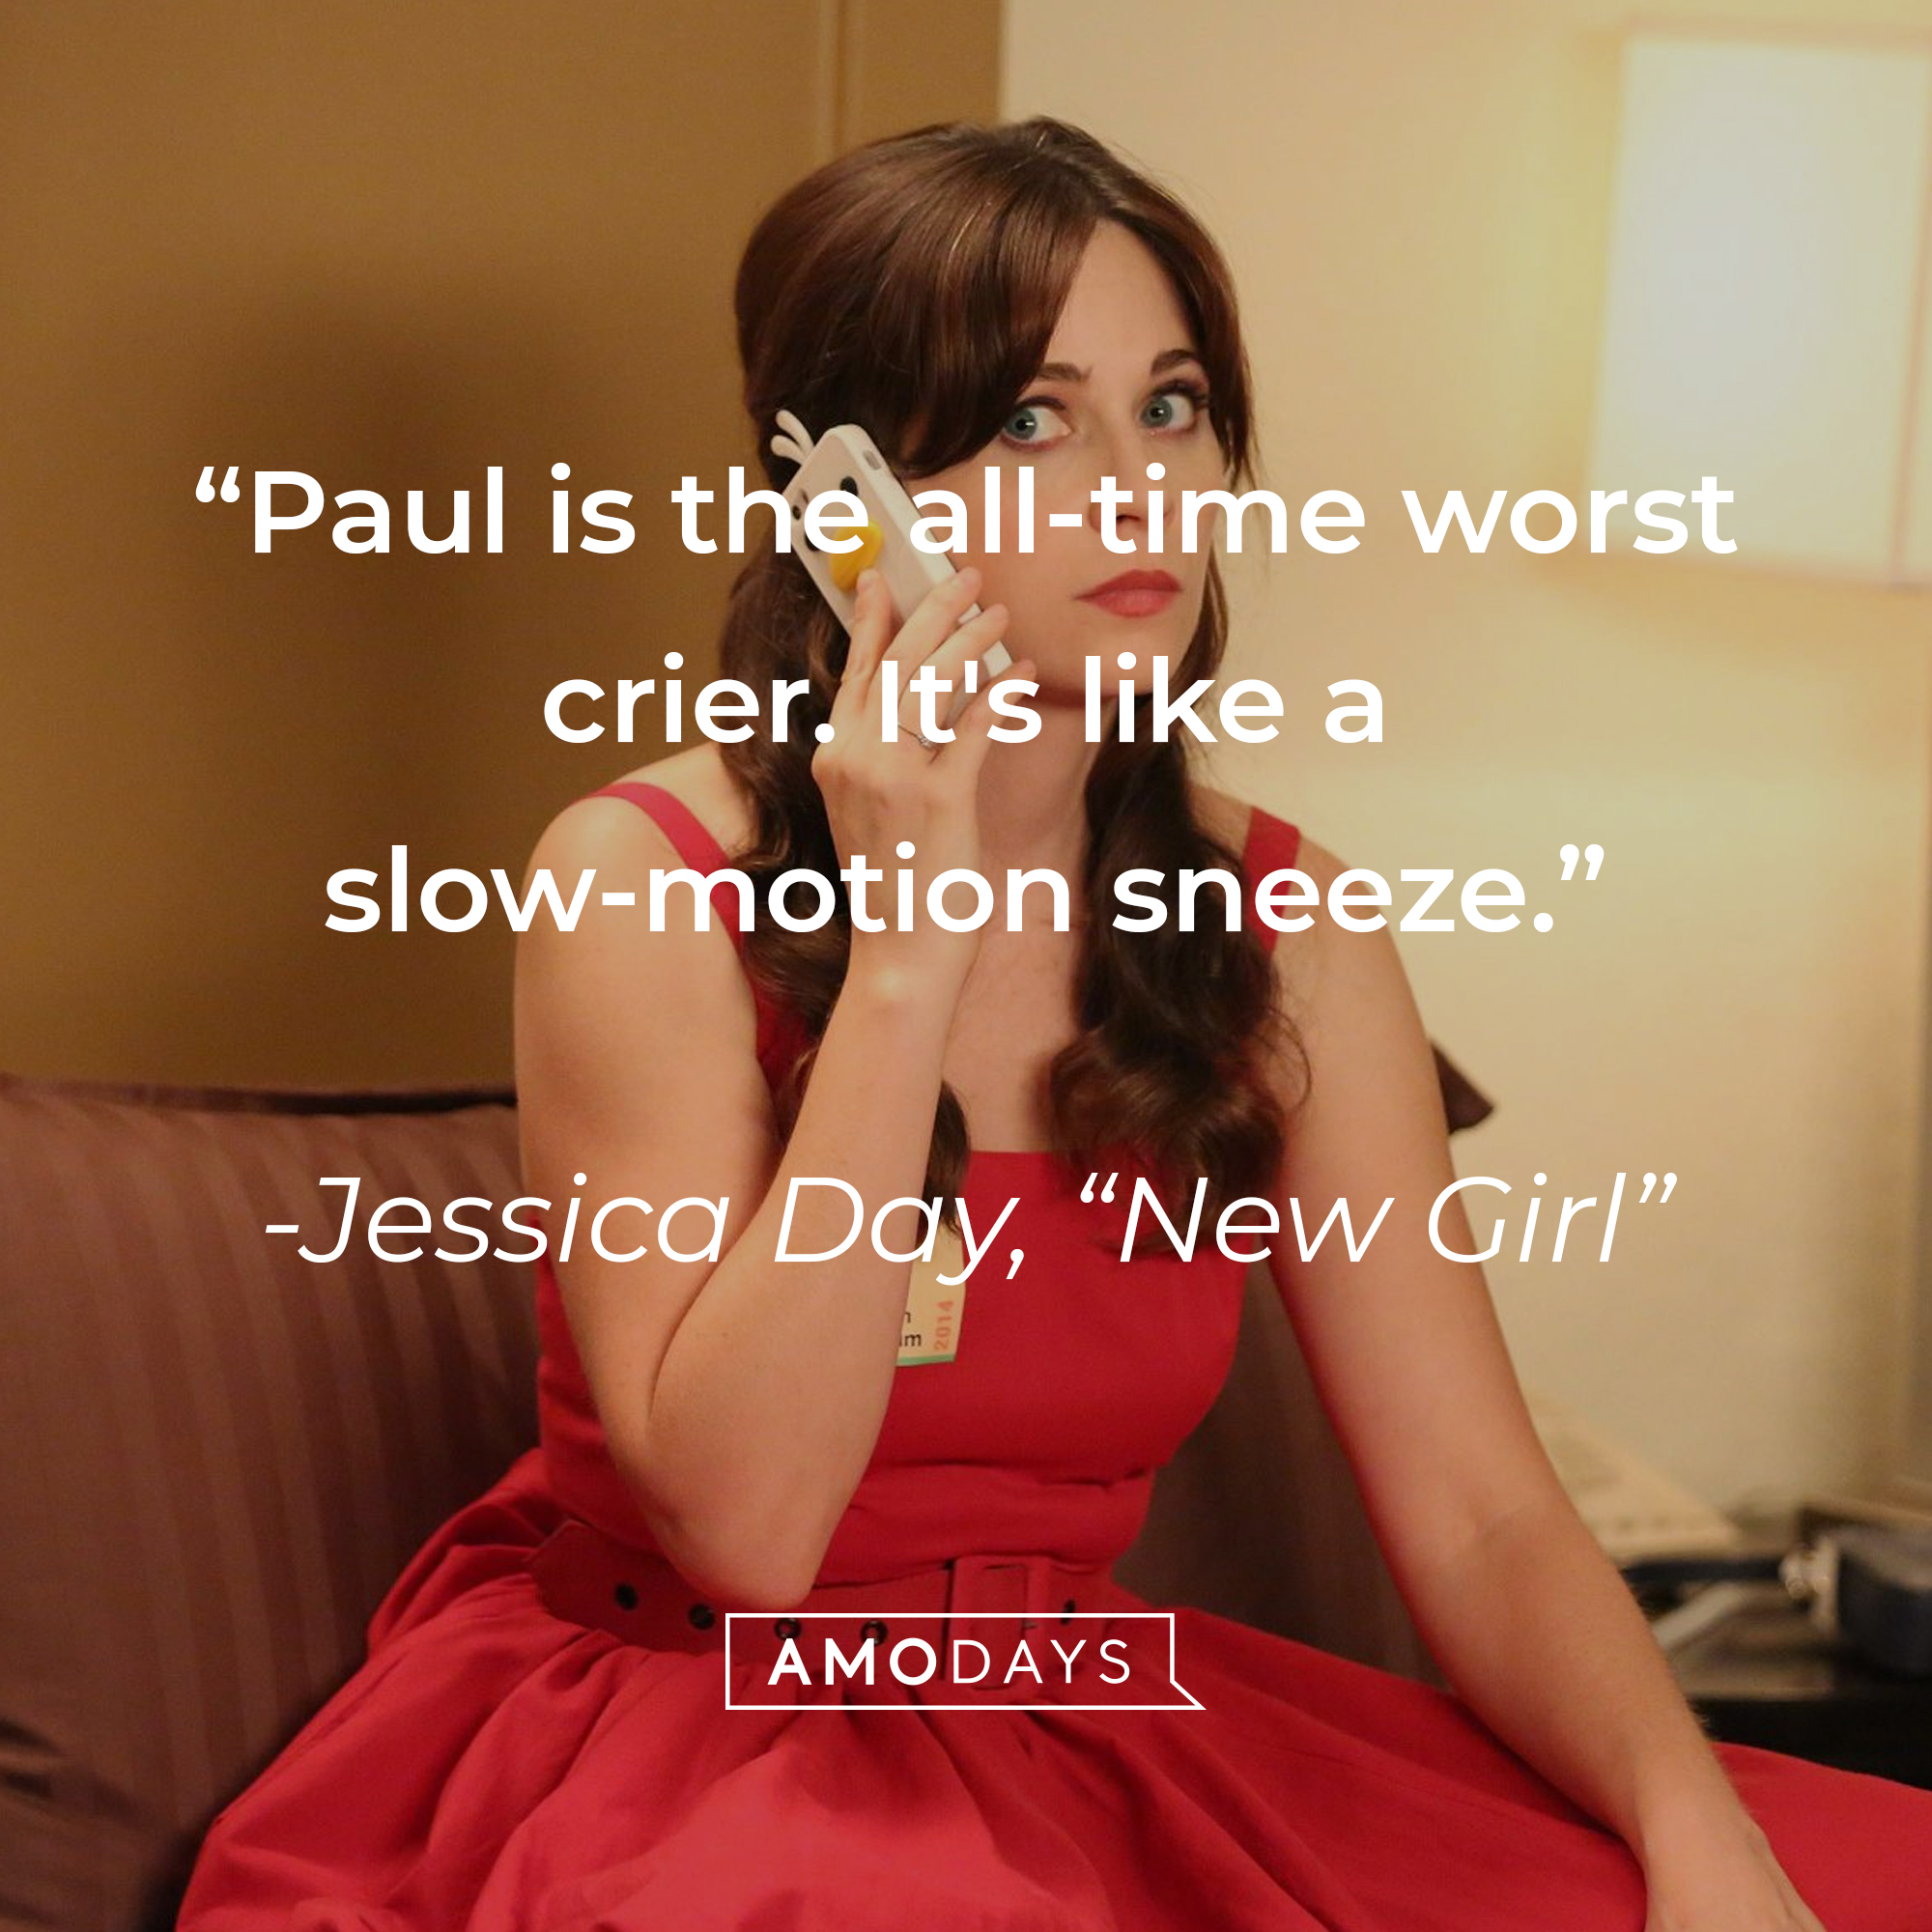 Jessica Day’s quote from “New Girl”: “Paul is the all-time worst crier. It's like a slow-motion sneeze.” | Source: facebook.com/OfficialNewGirl